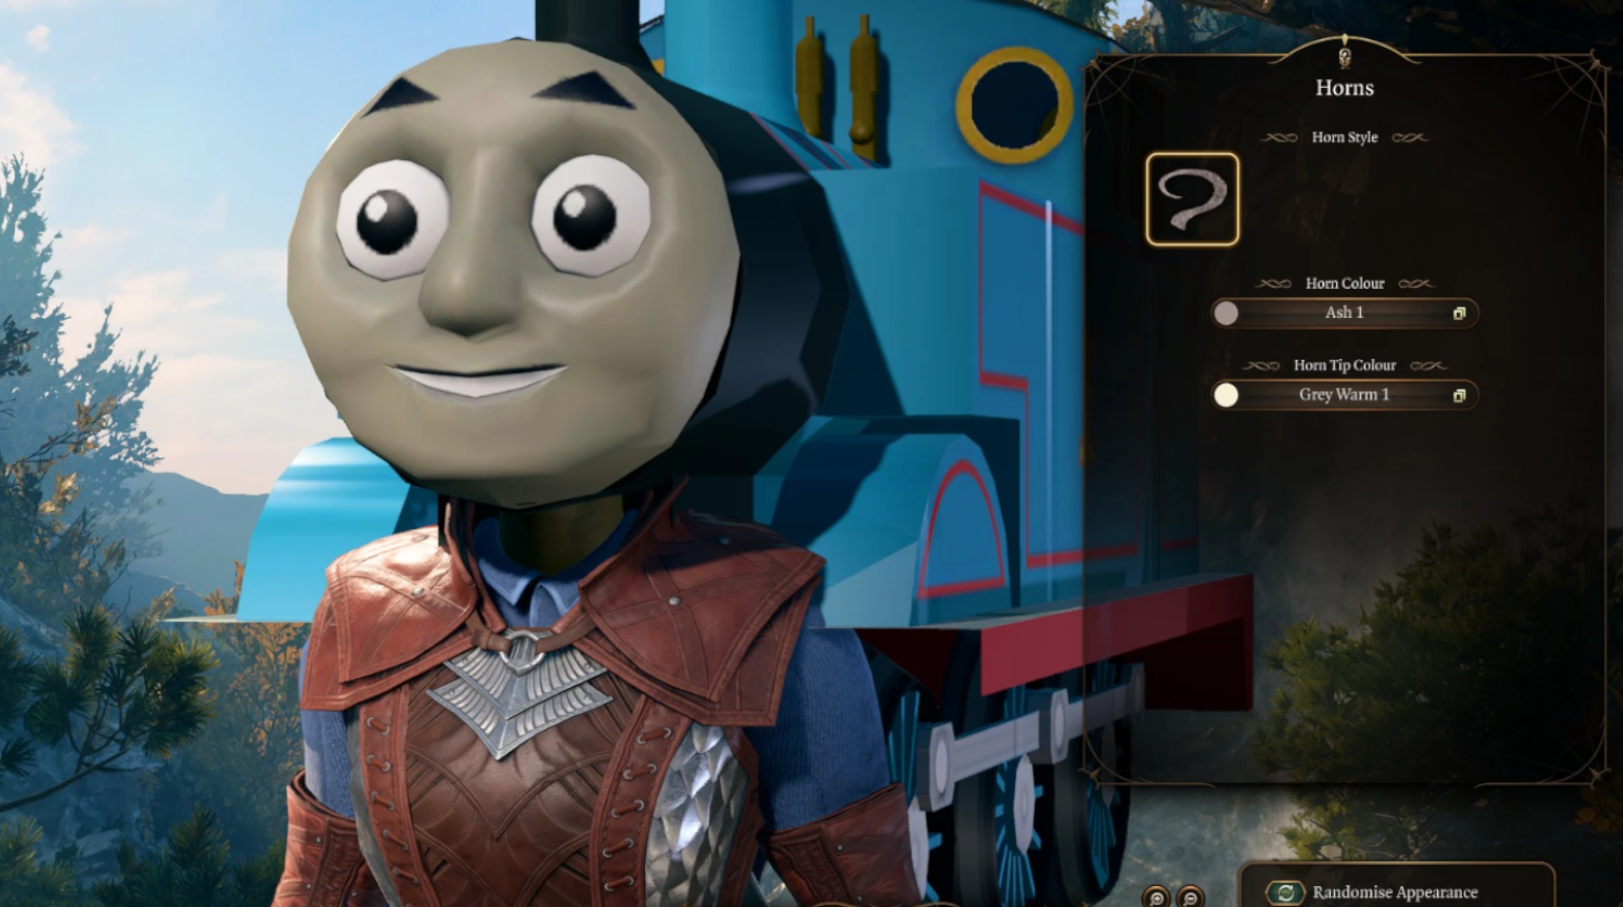 Thomas the Tank Engine stares into the distance, remembering his crimes, in Baldur's Gate 3.